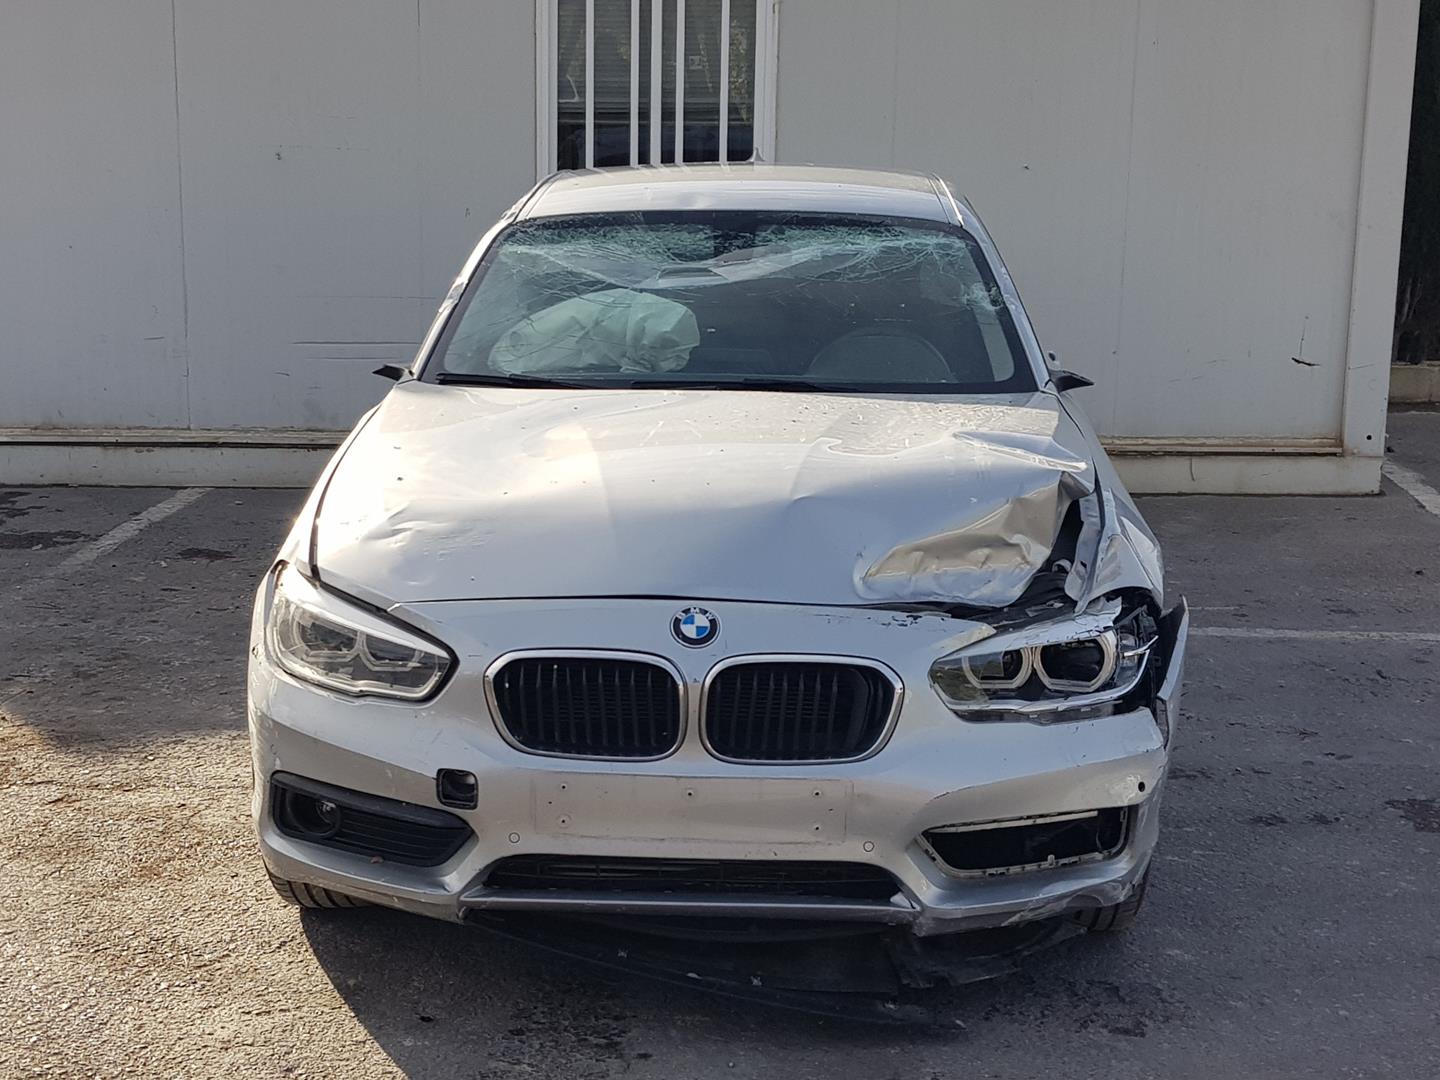 BMW 1 Series F20/F21 (2011-2020) Front Right Door TOCADA 21717460